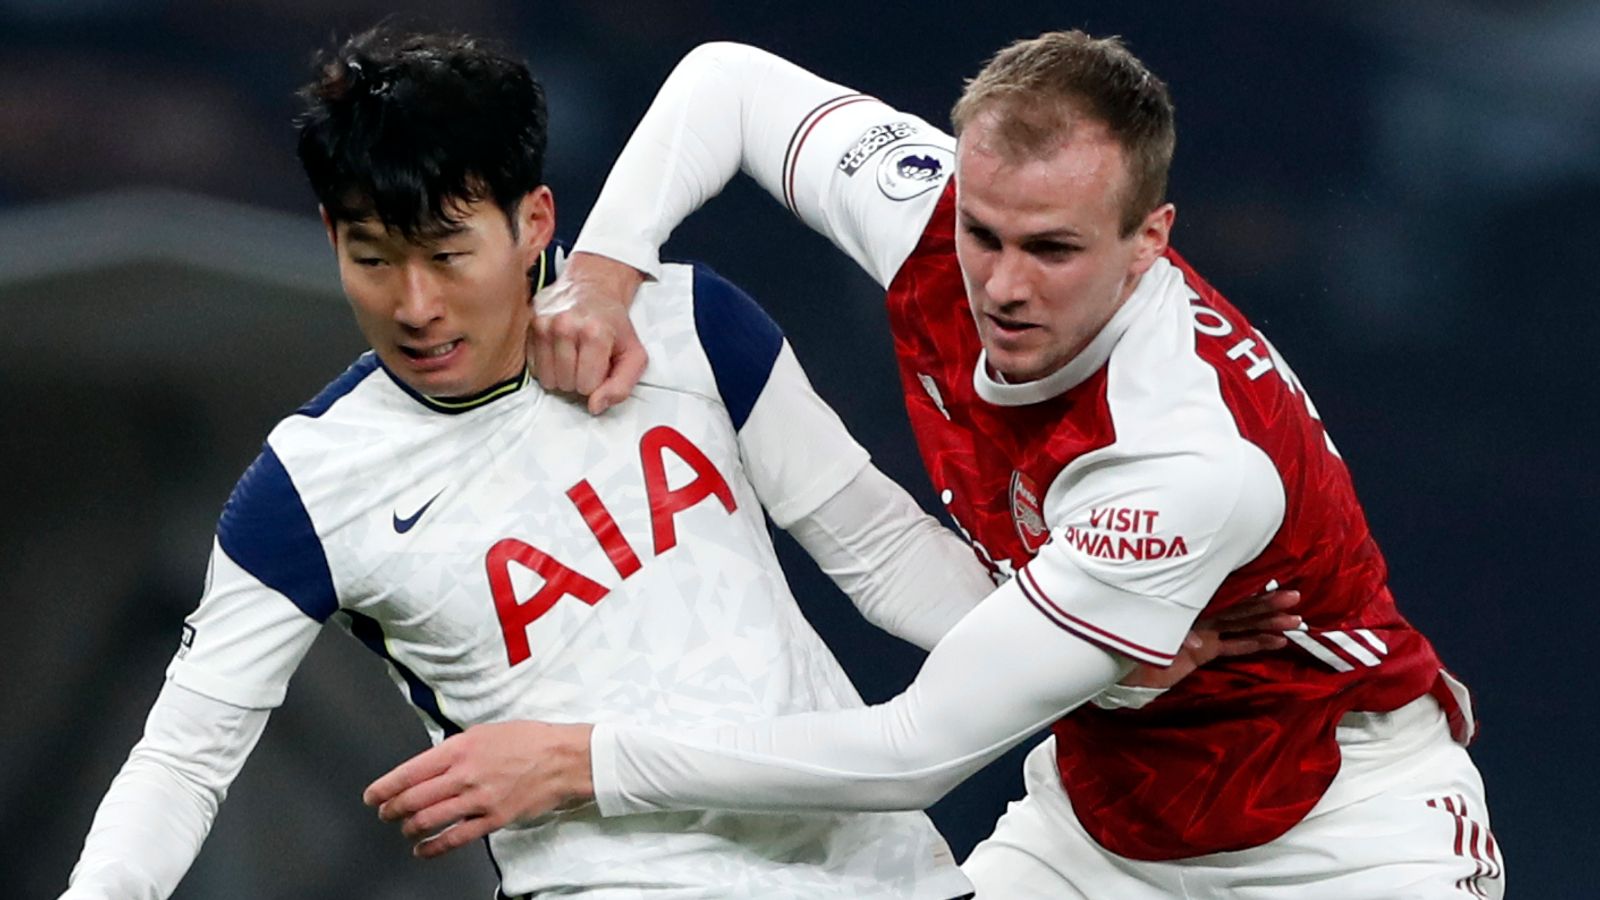 Rob Holding makes Arsenal's red card record even worse at Spurs - Futbol on  FanNation